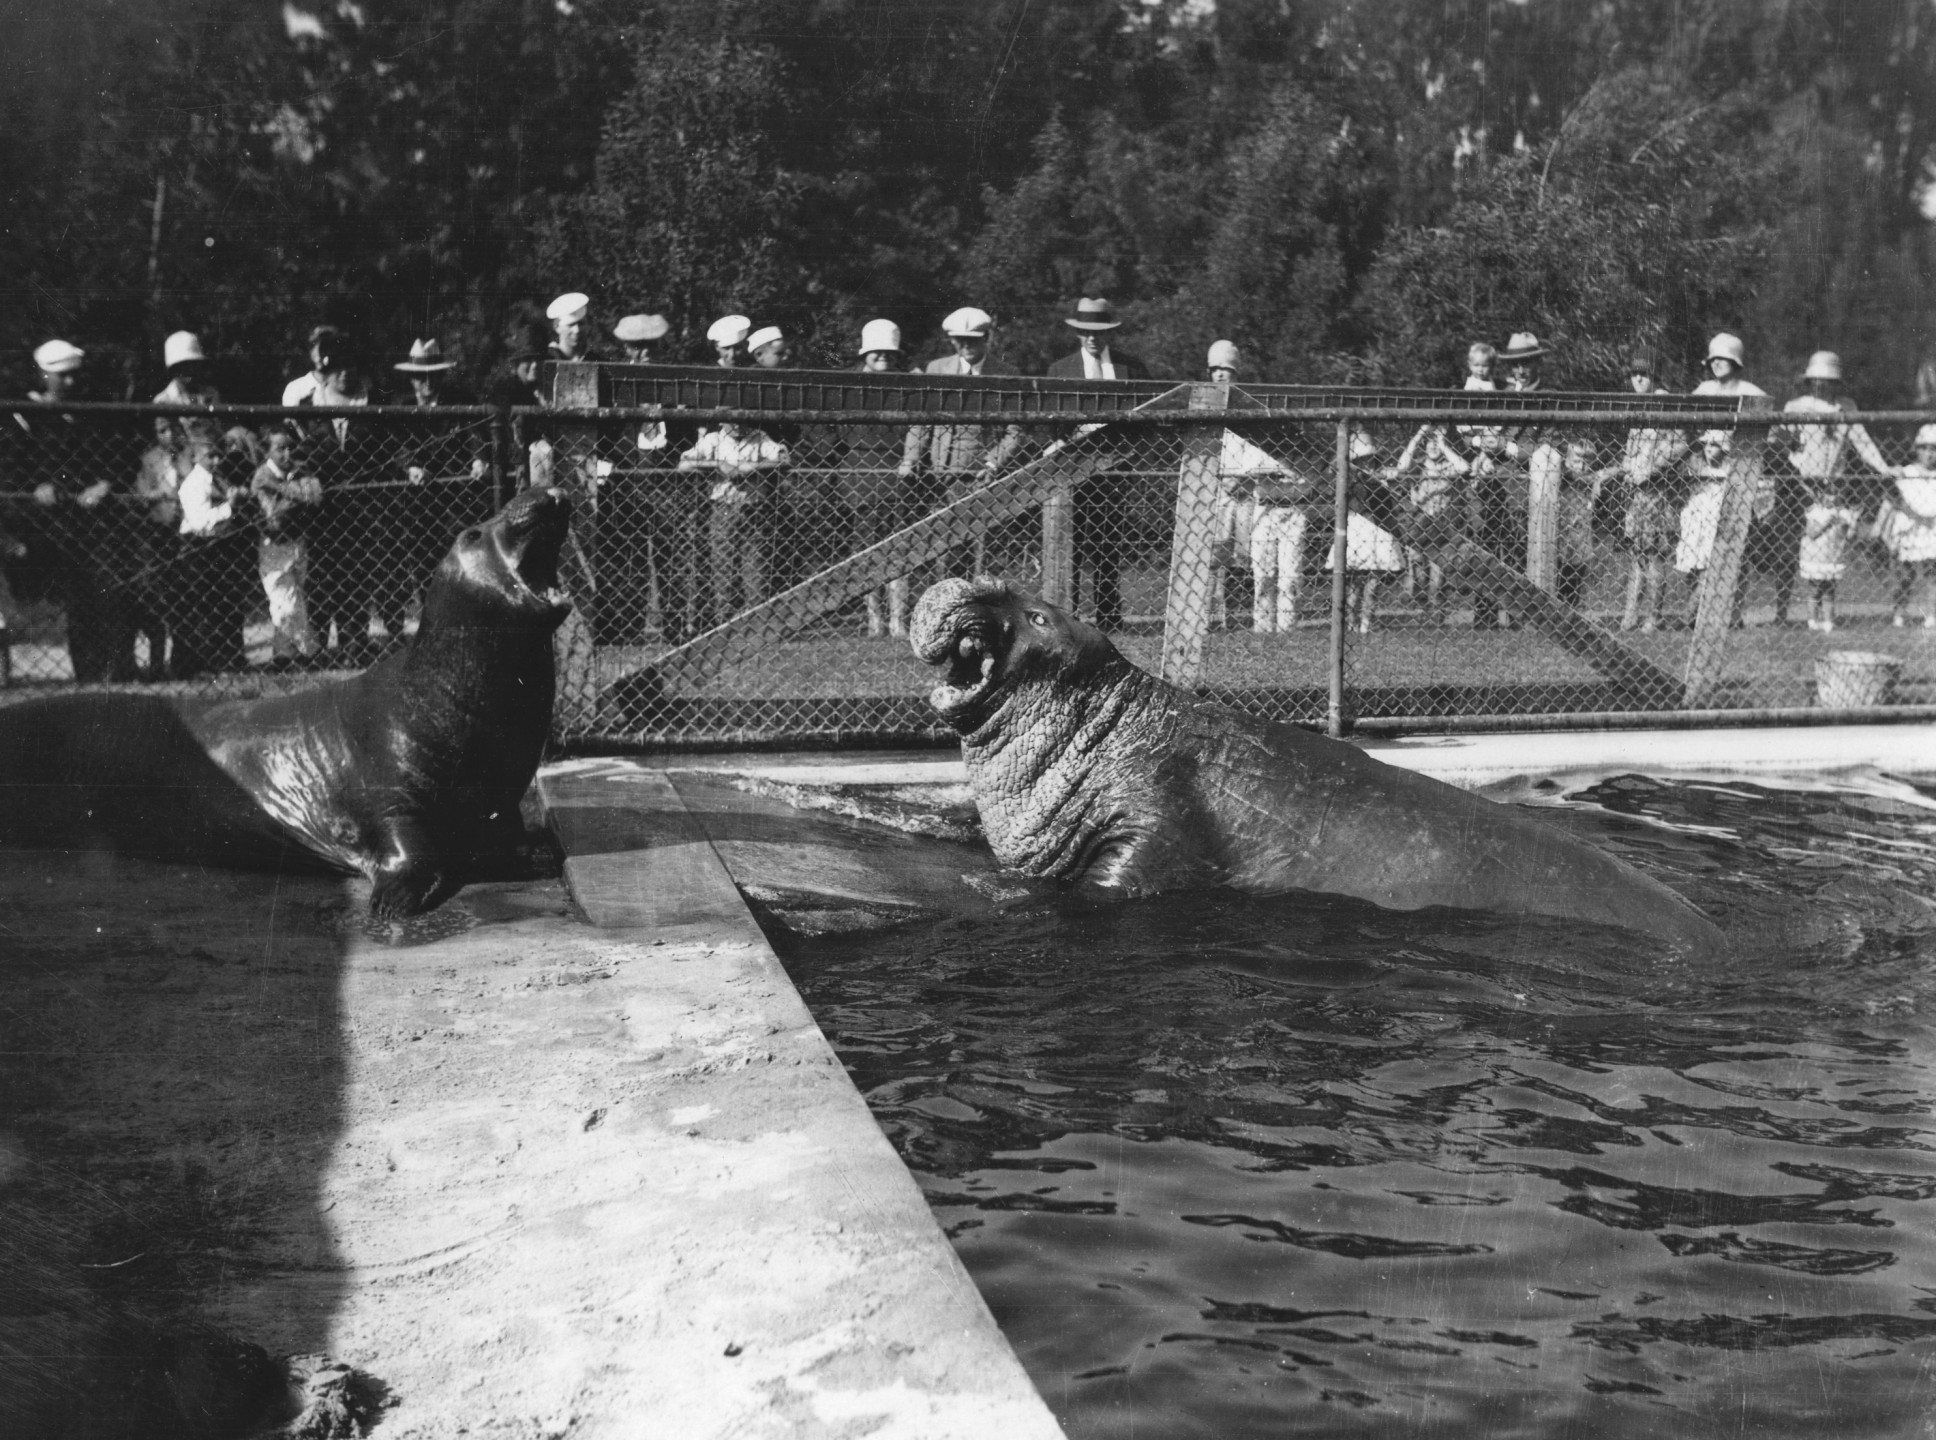 Elephant seals helped the San Diego Zoo get its start, because Dr. Harry could trade them for other animals to build the collection. This role would later be honored with the image of an elephant seal on San Diego Zoo's conservation medal.